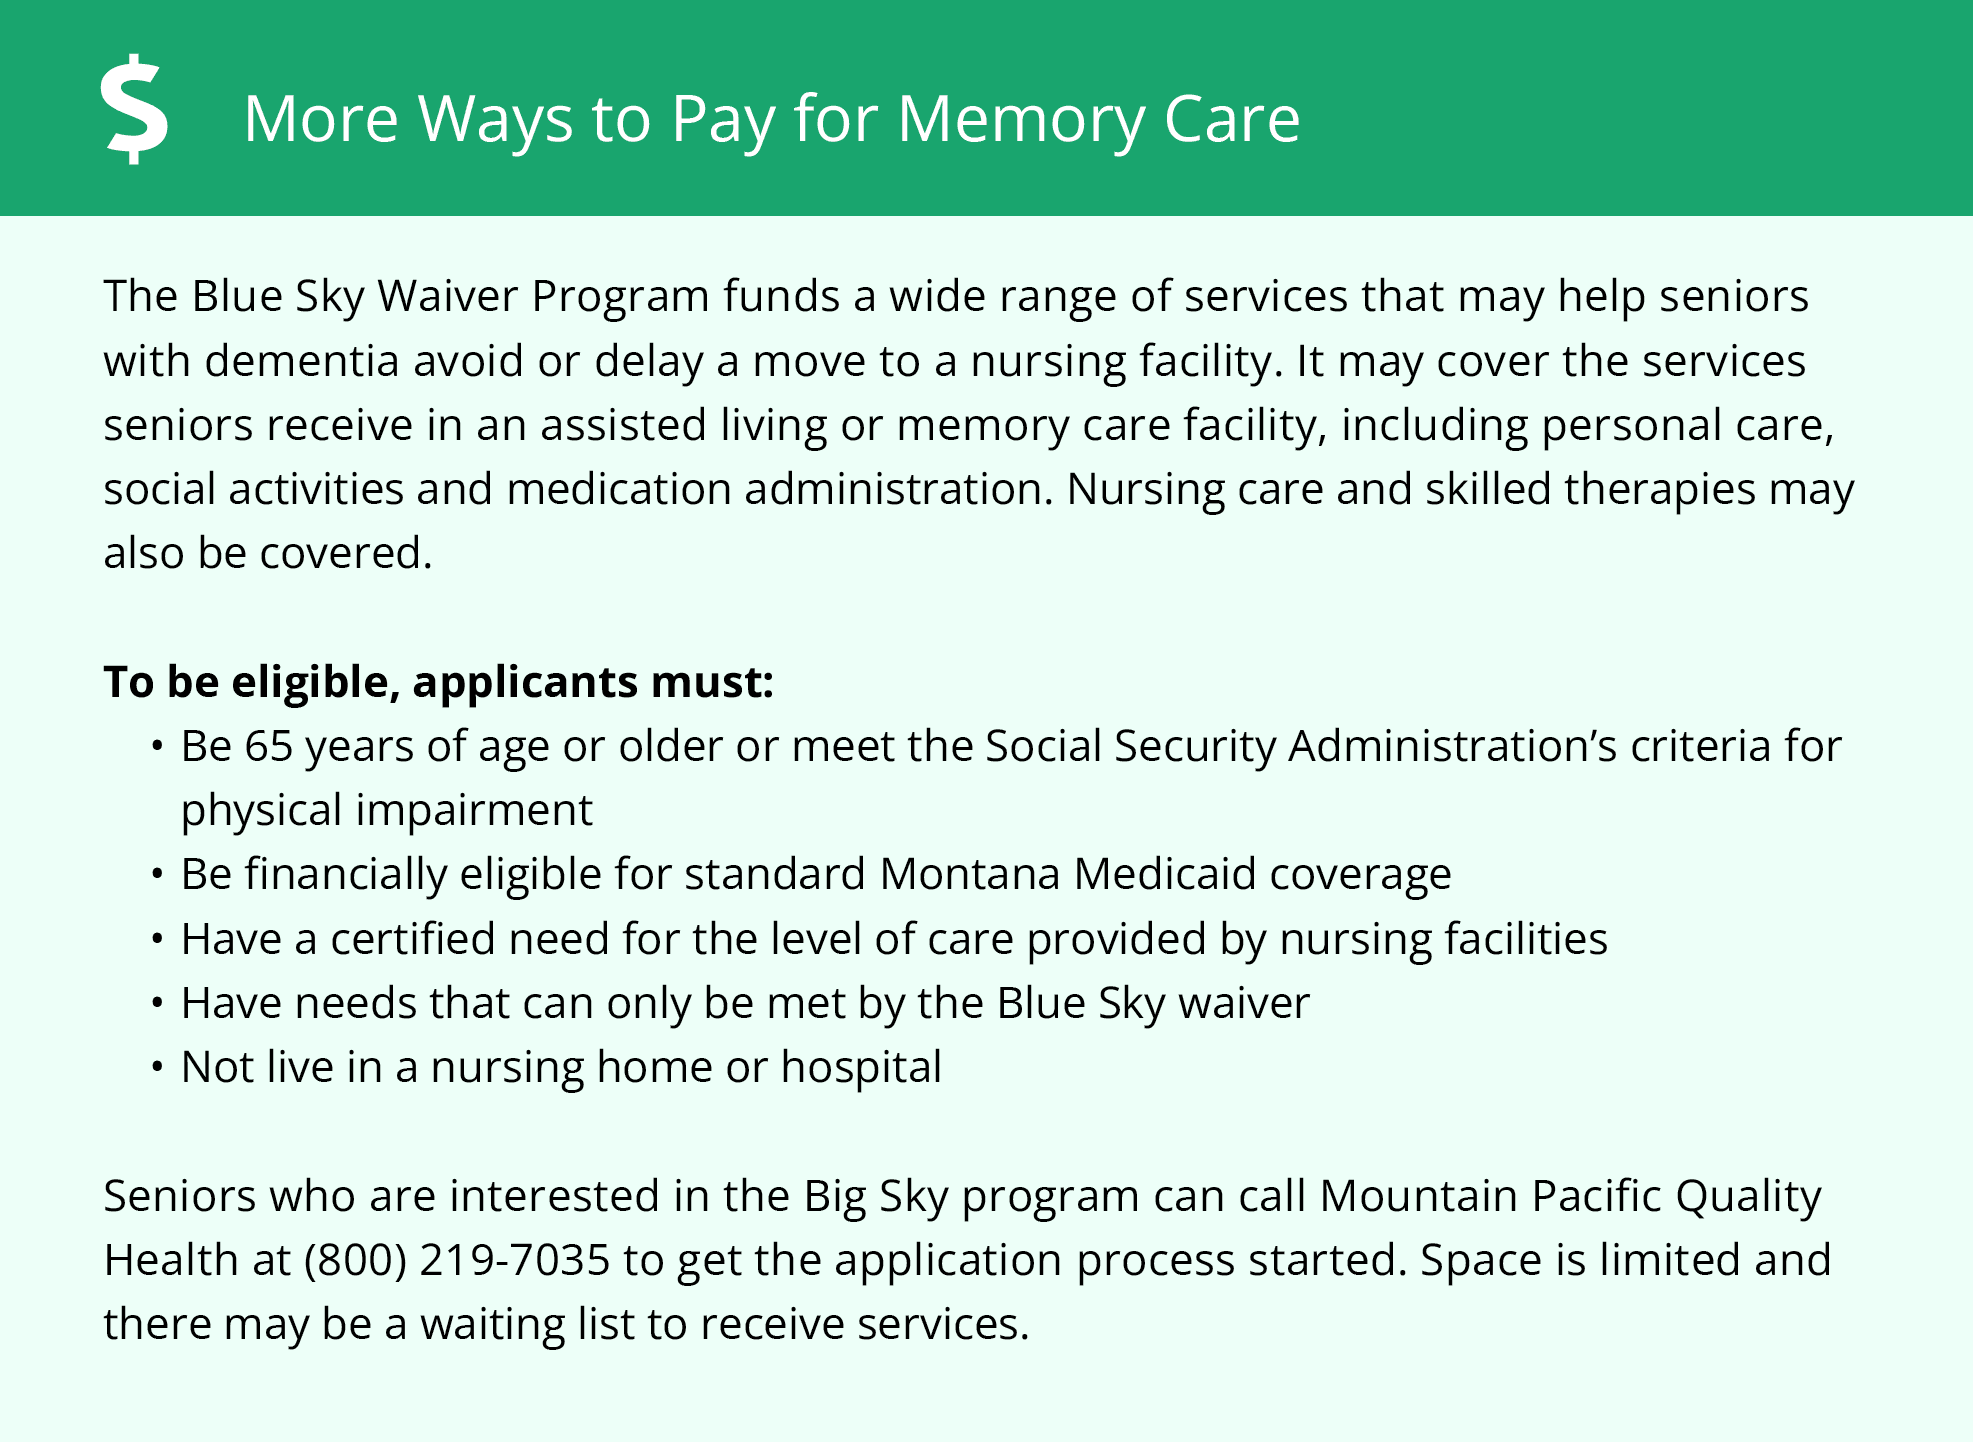 Financial Assistance for Memory Care in Montana